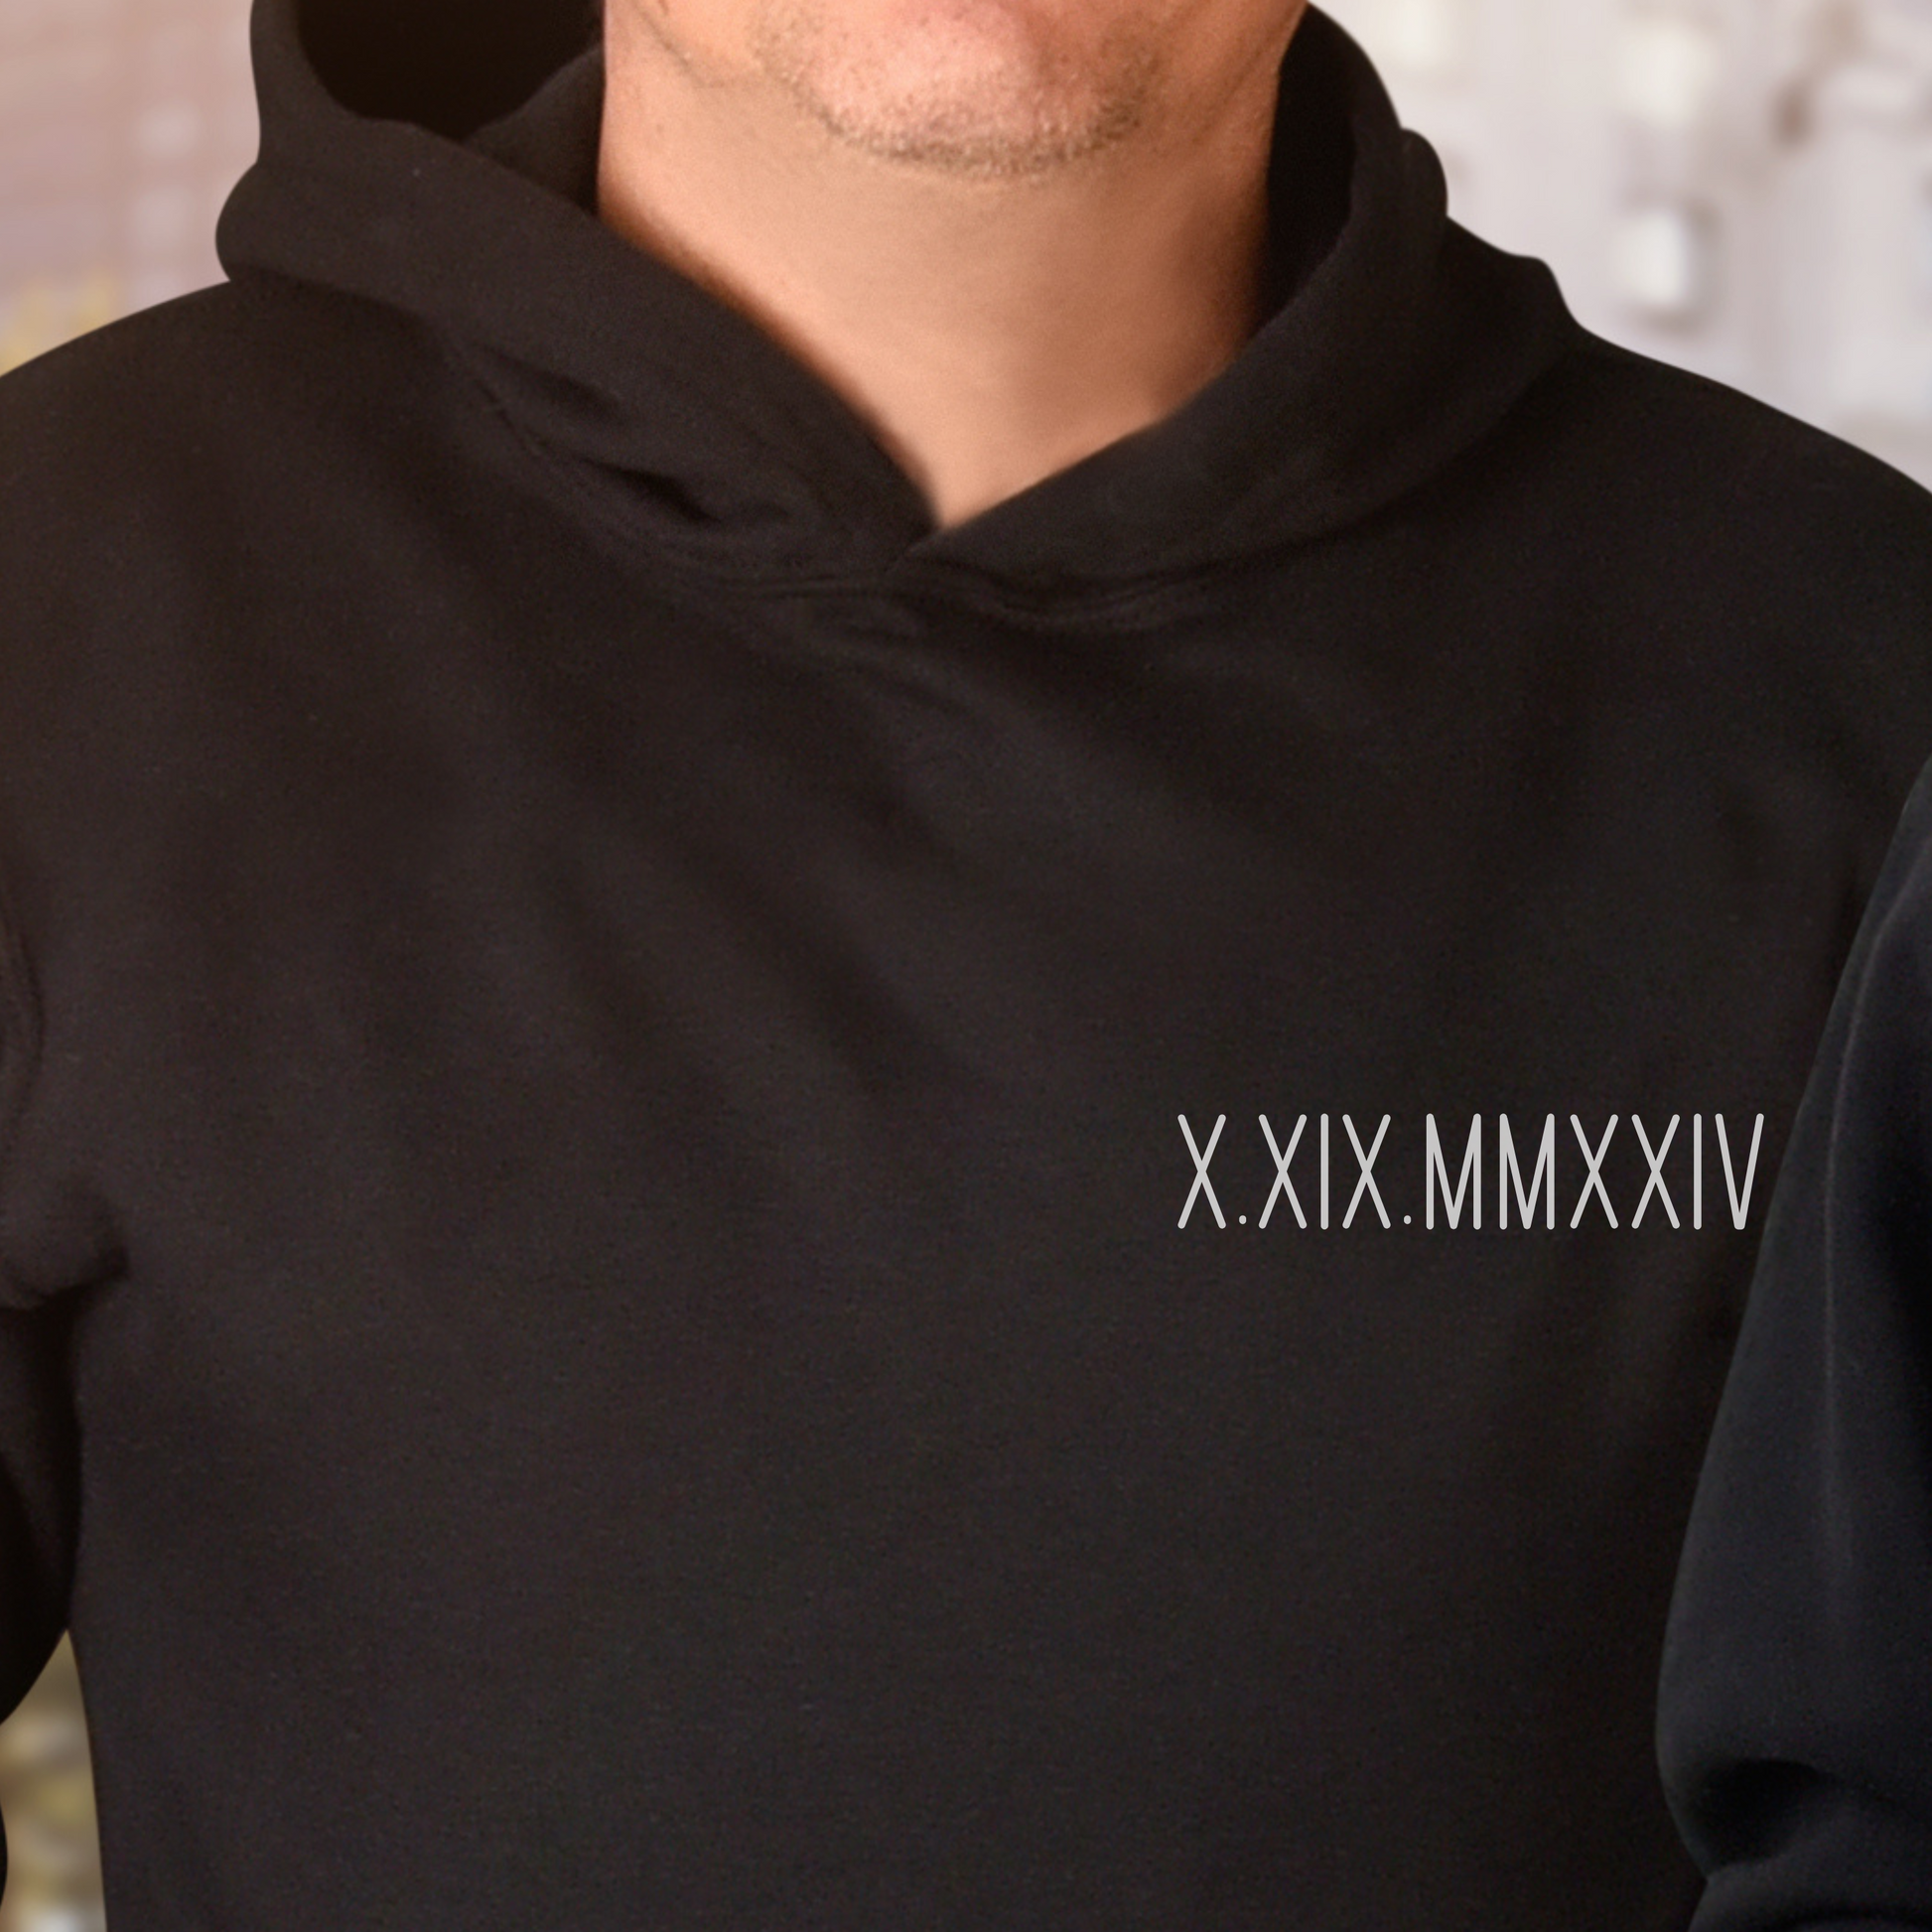 custom roman numeral hoodie, couples gift, personalized date and initial hoodie, engagements, anniversary, anniversaries, bachelor gift, bachelorette gift, bridesmaid gift, birthday gift for her, valentines gift, gift for him, minimalist couples hoodie